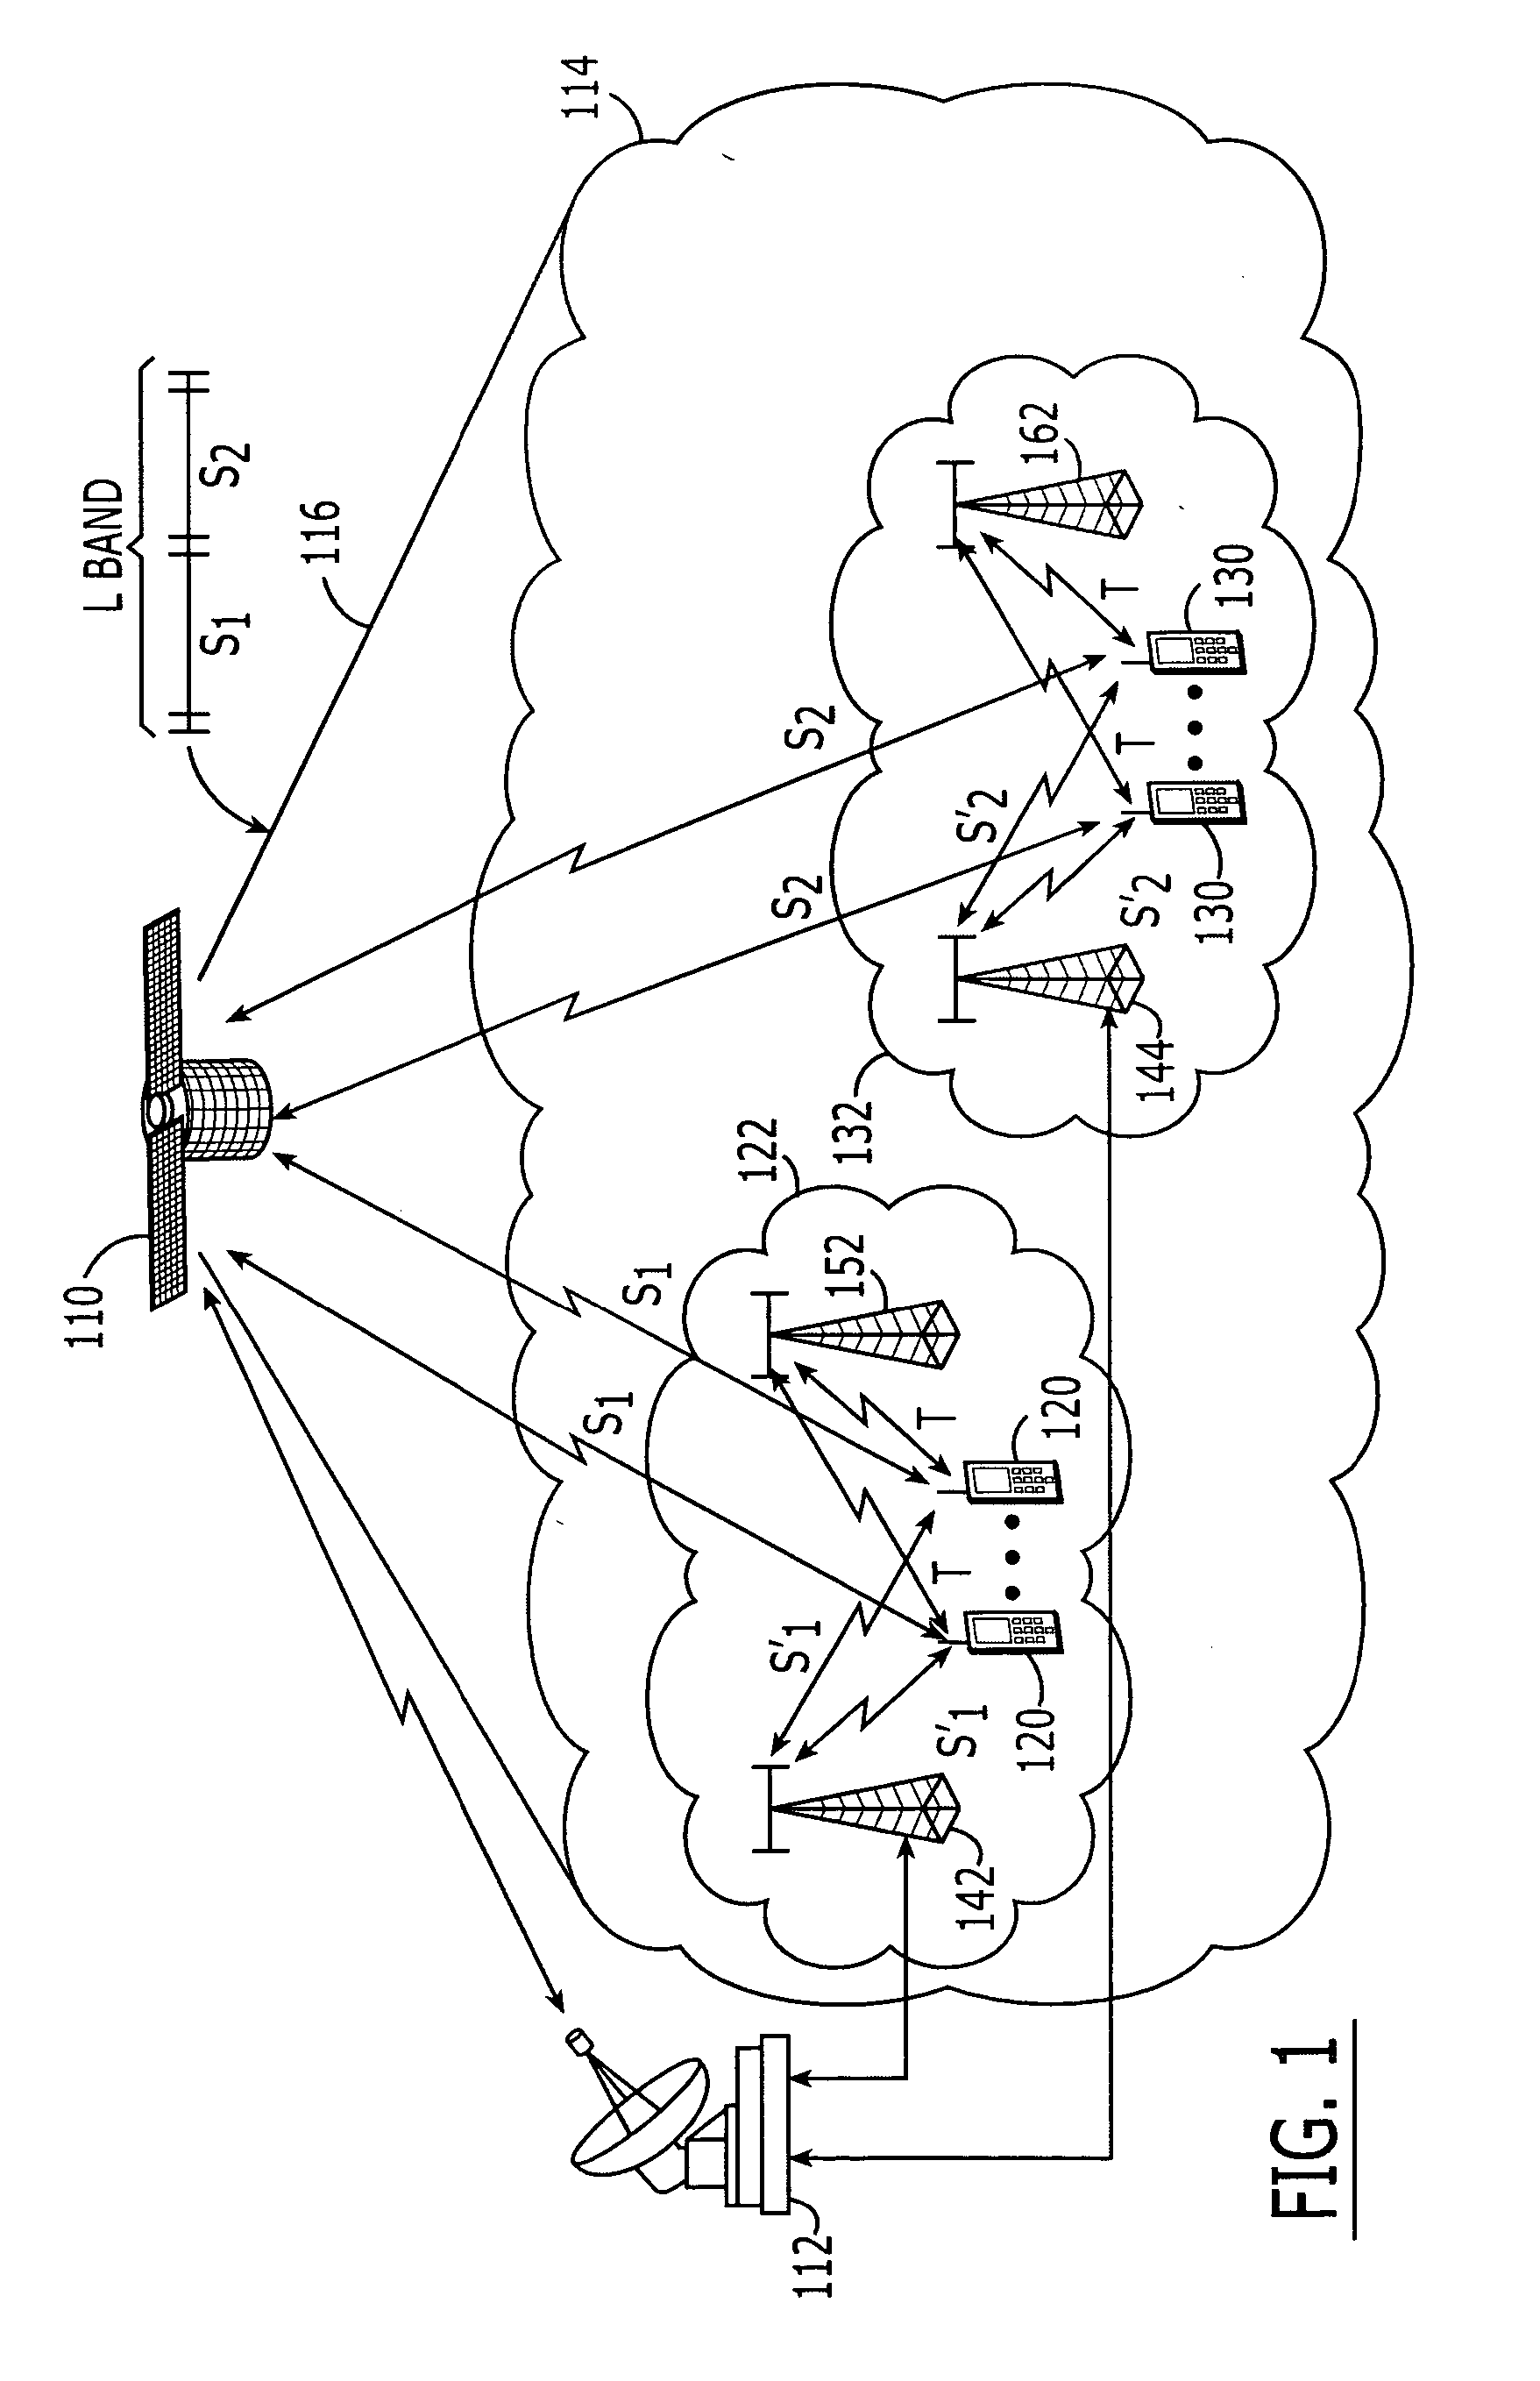 Multi frequency band/multi air interface/multi spectrum reuse cluster size/multi cell size satellite radioterminal communicaitons systems and methods